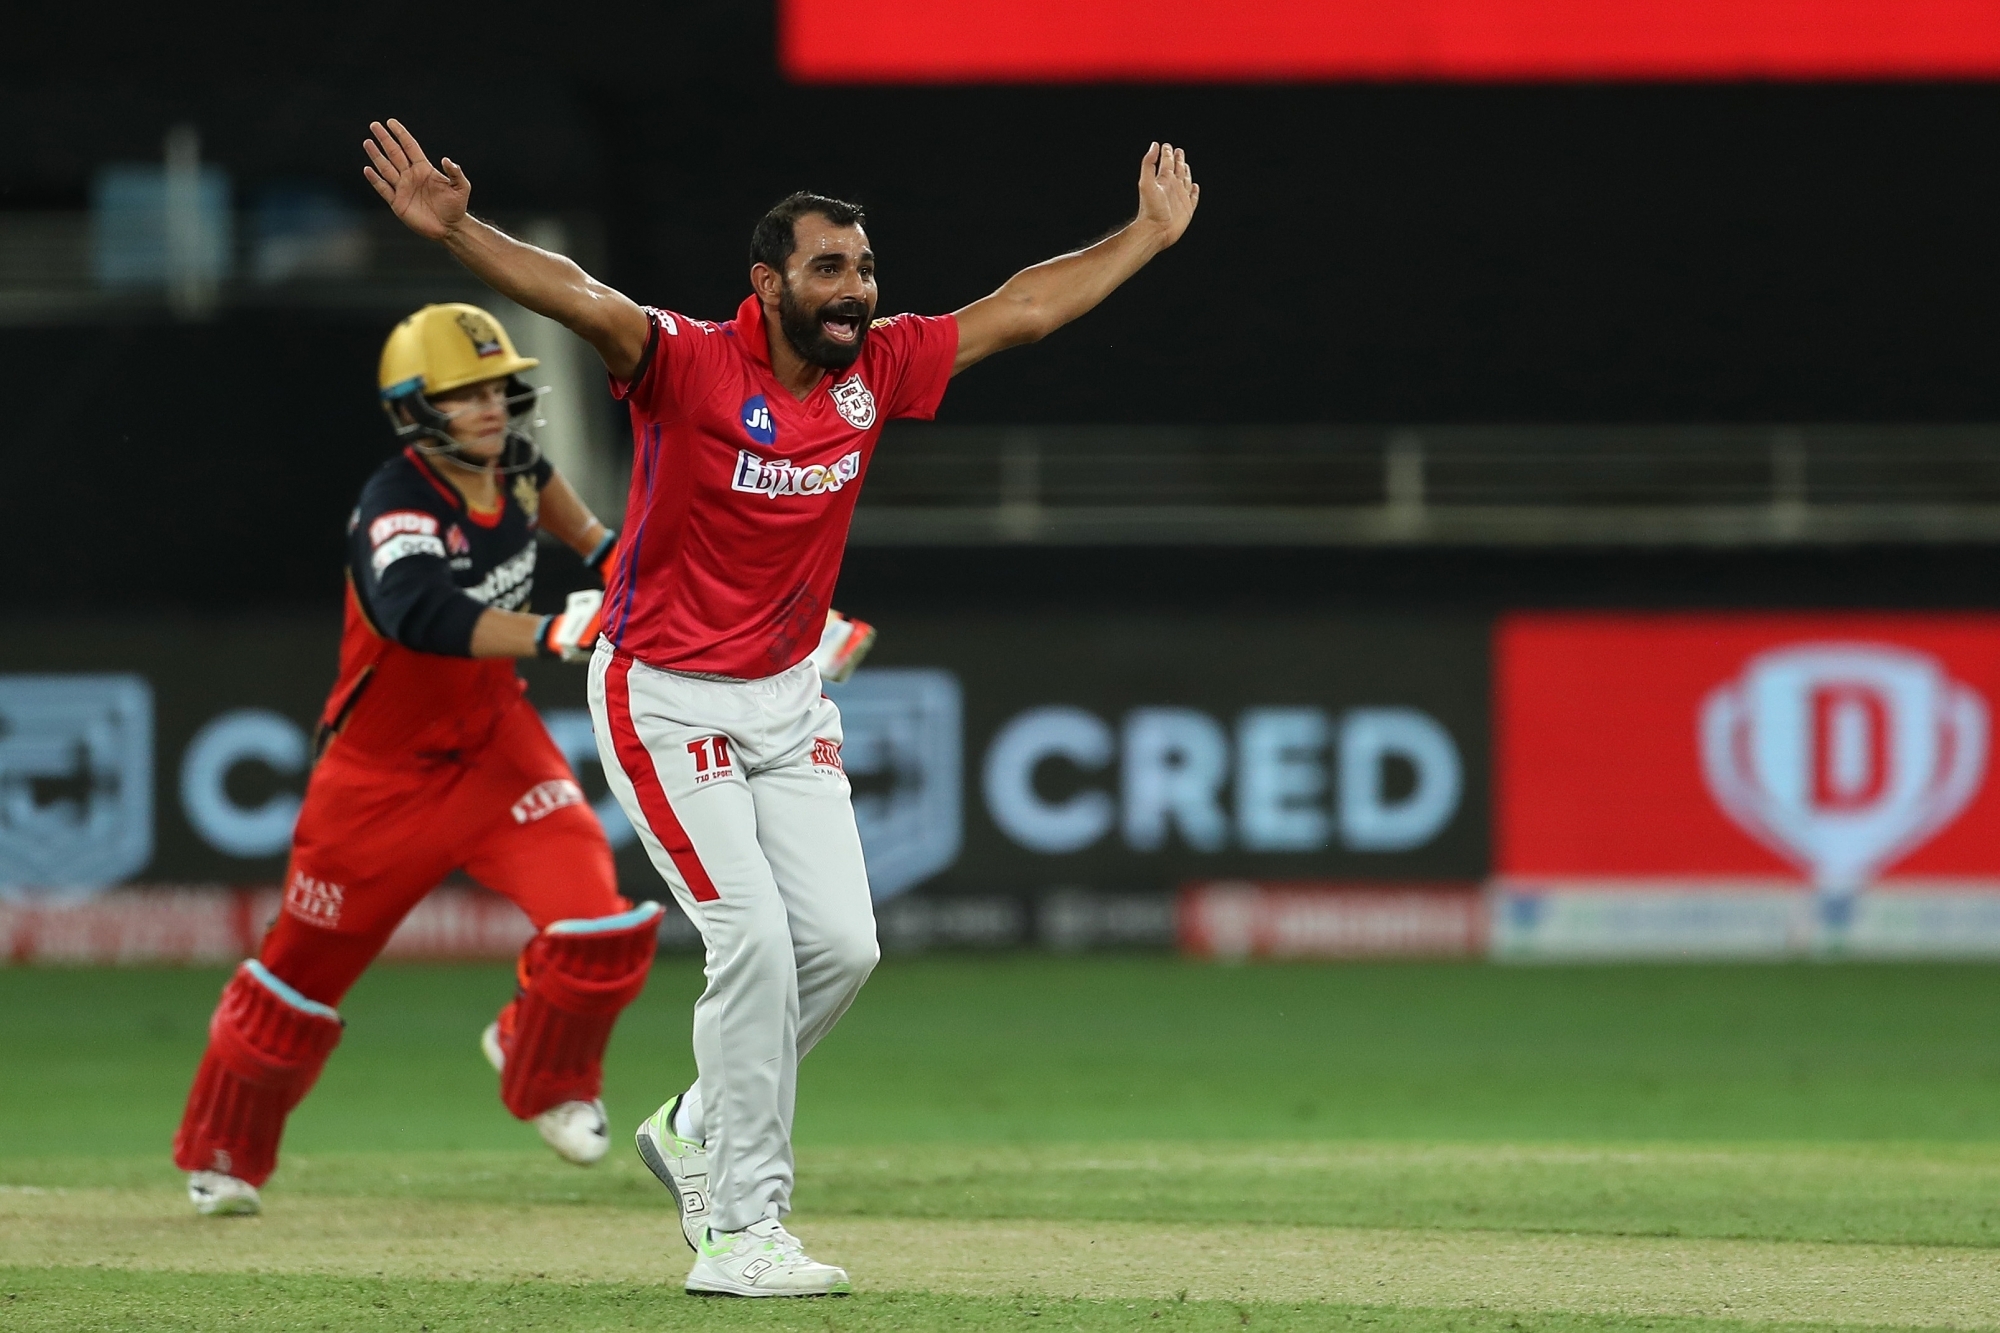 Mohammad Shami led the KXIP pace bowling attack single-handedly  | BCCI/IPL